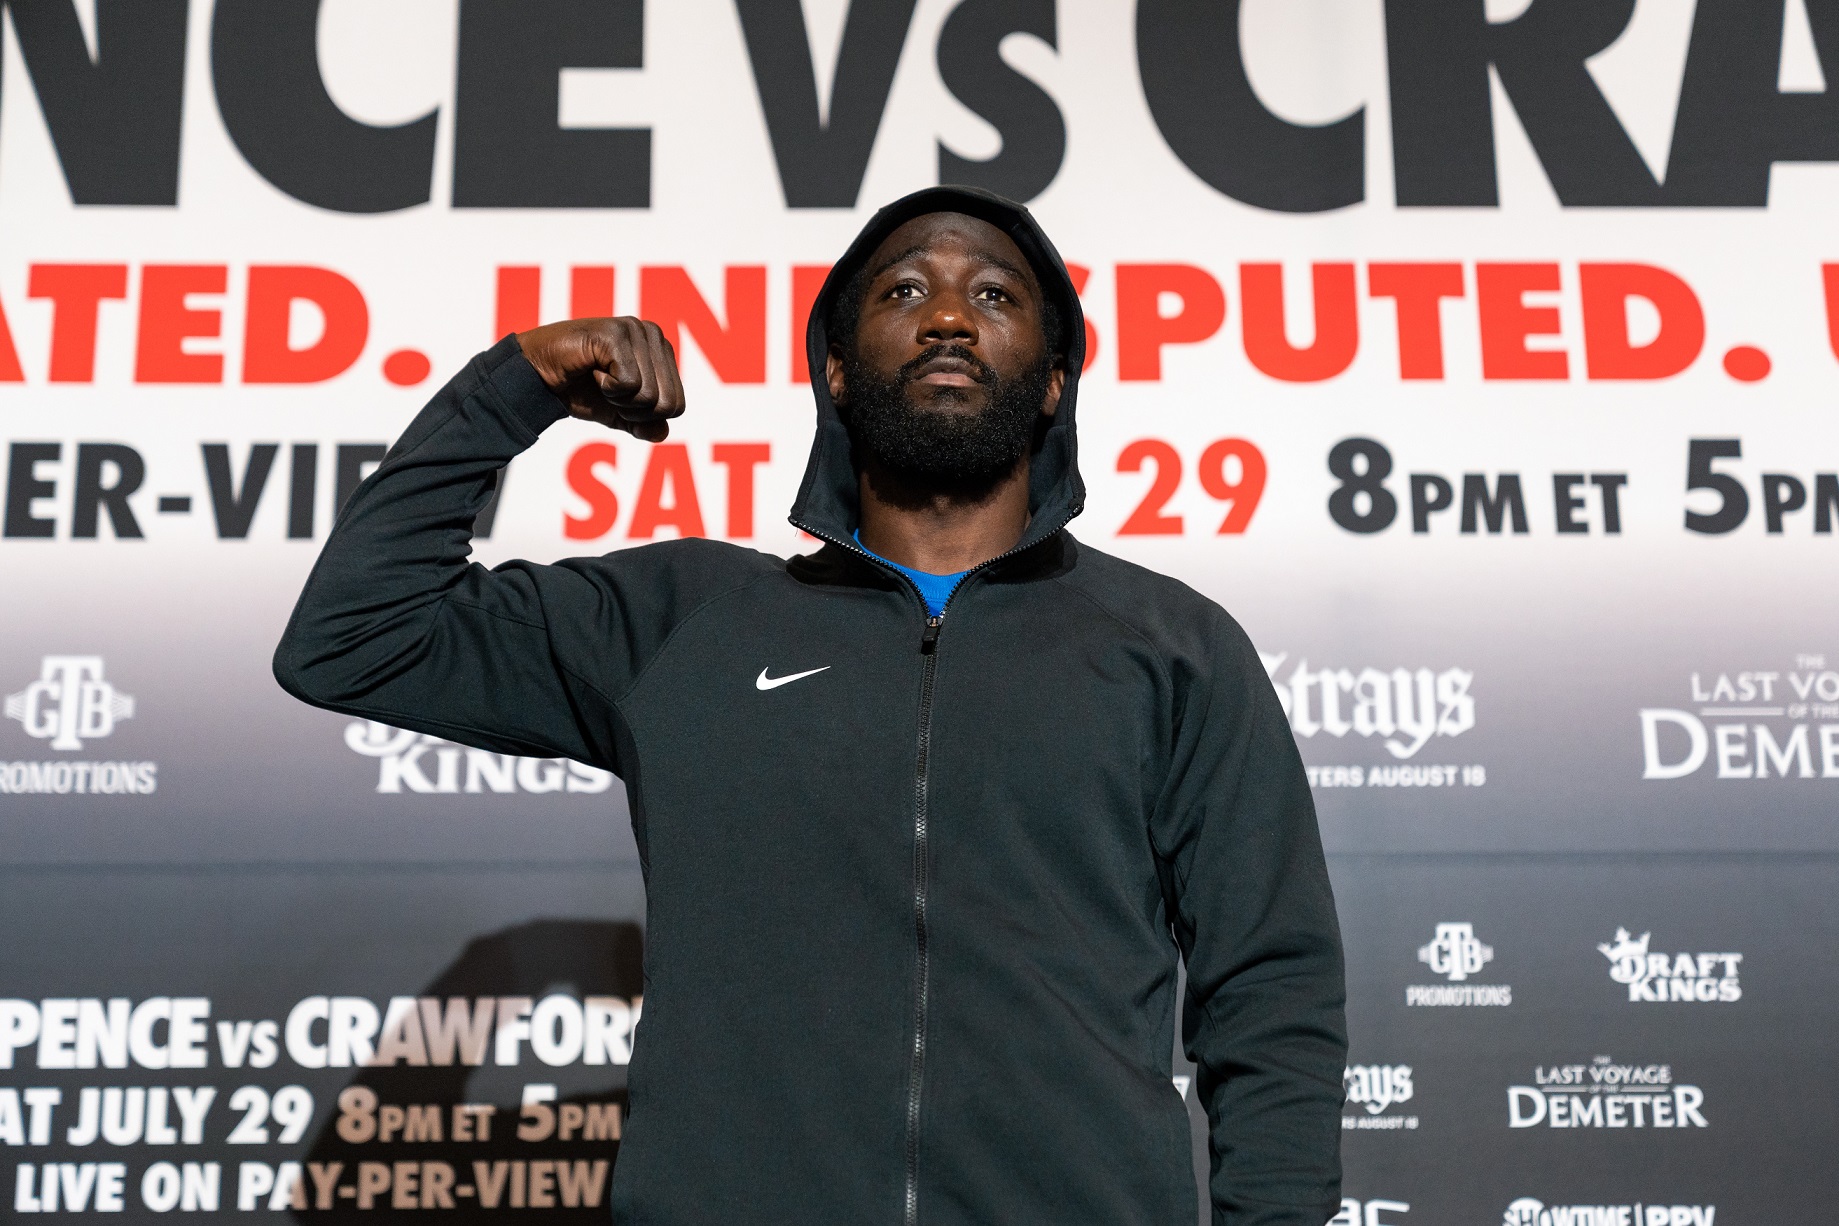 Terence Crawford gatecrashes Teofimo Lopez weigh-in and fires expletives at rival